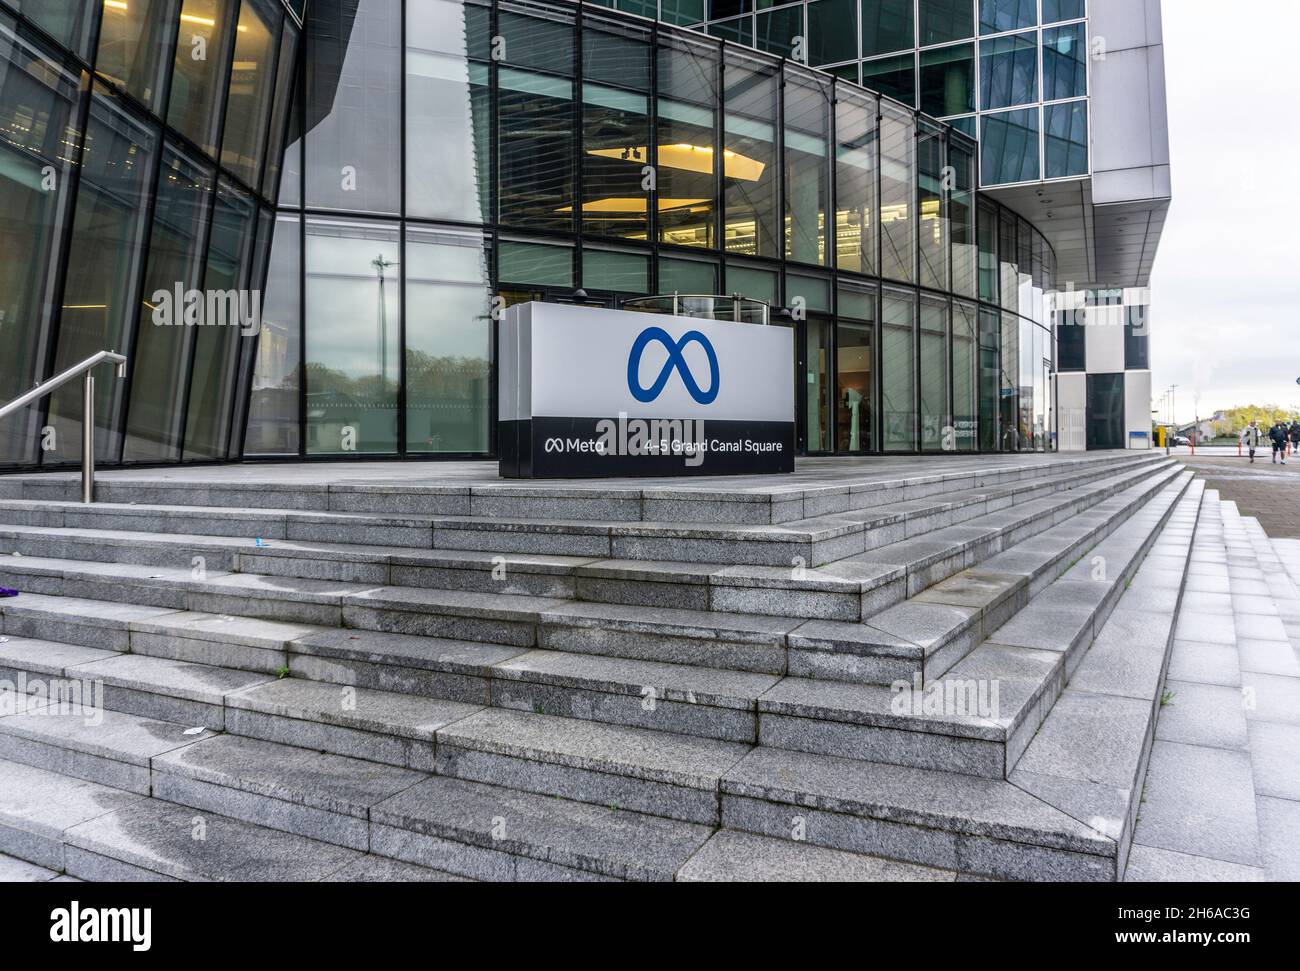 The office of Meta, (formerly called Facebook) in Grand Canal Square, Dublin, Ireland. Stock Photo